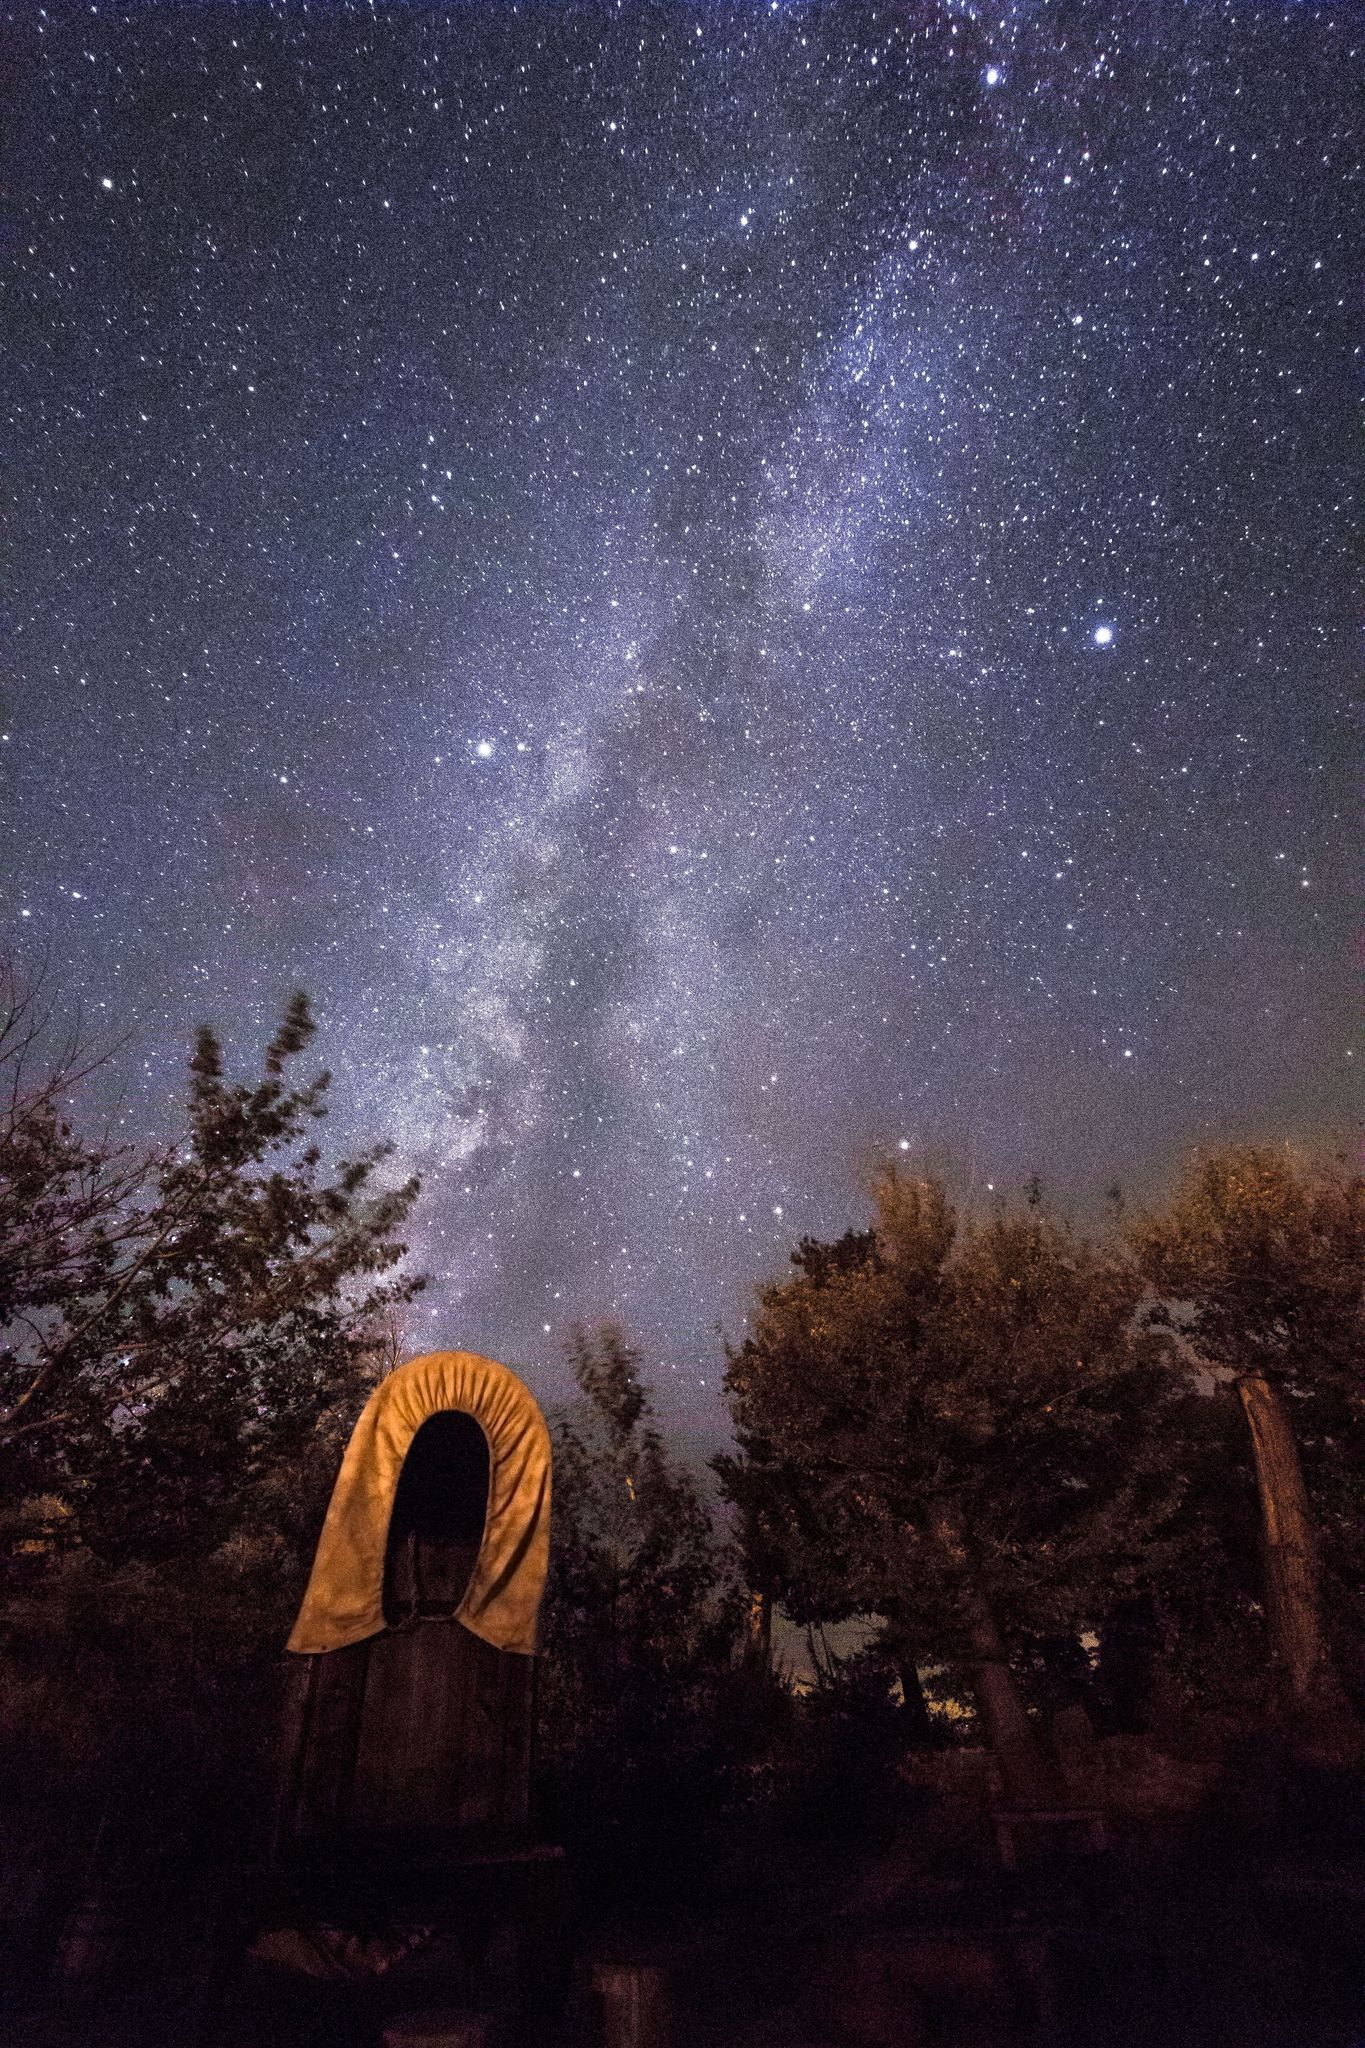 The Milky Way glitters above the chuckwagon at Pipe Spring National Monument. The monument has great night sky clarity because it is located inside the first Dark Sky Nation: The Kaibab Indian Reservation.